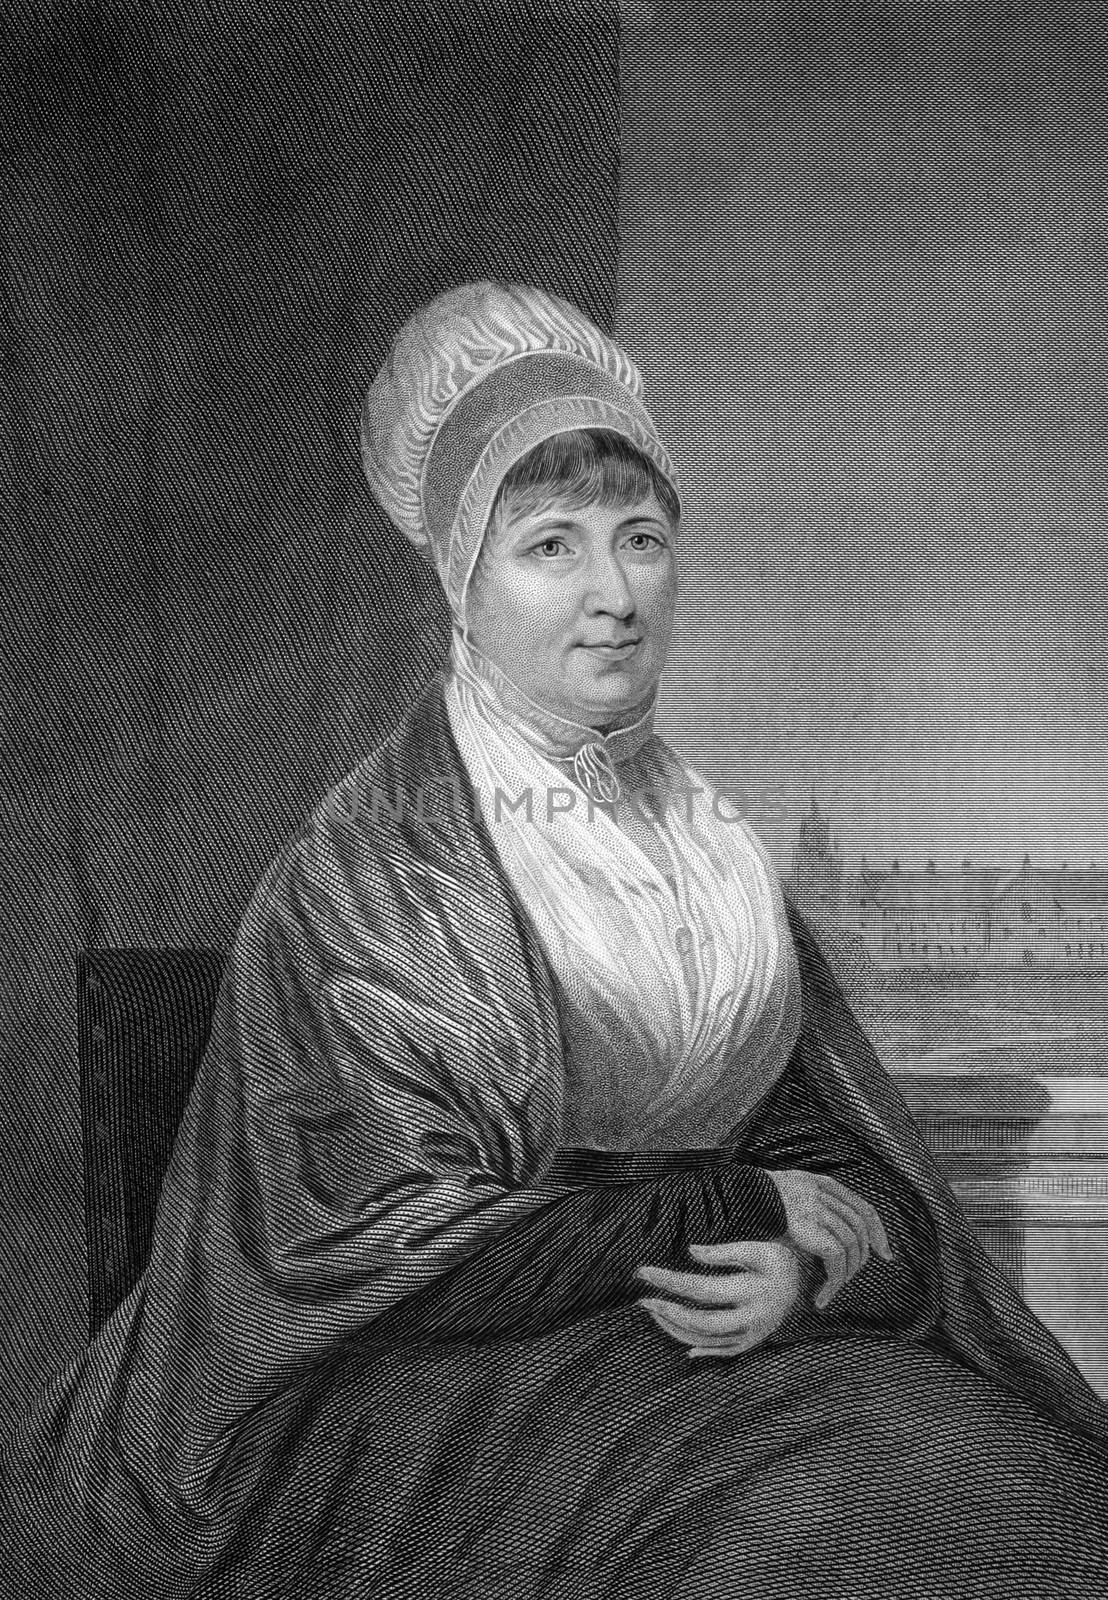 Elizabeth Fry (1780-1845) on engraving from 1873. English prison reformer, social reformer and, as a Quaker, a Christian philanthropist. Engraved by unknown artist and published in ''Portrait Gallery of Eminent Men and Women with Biographies'',USA,1873.